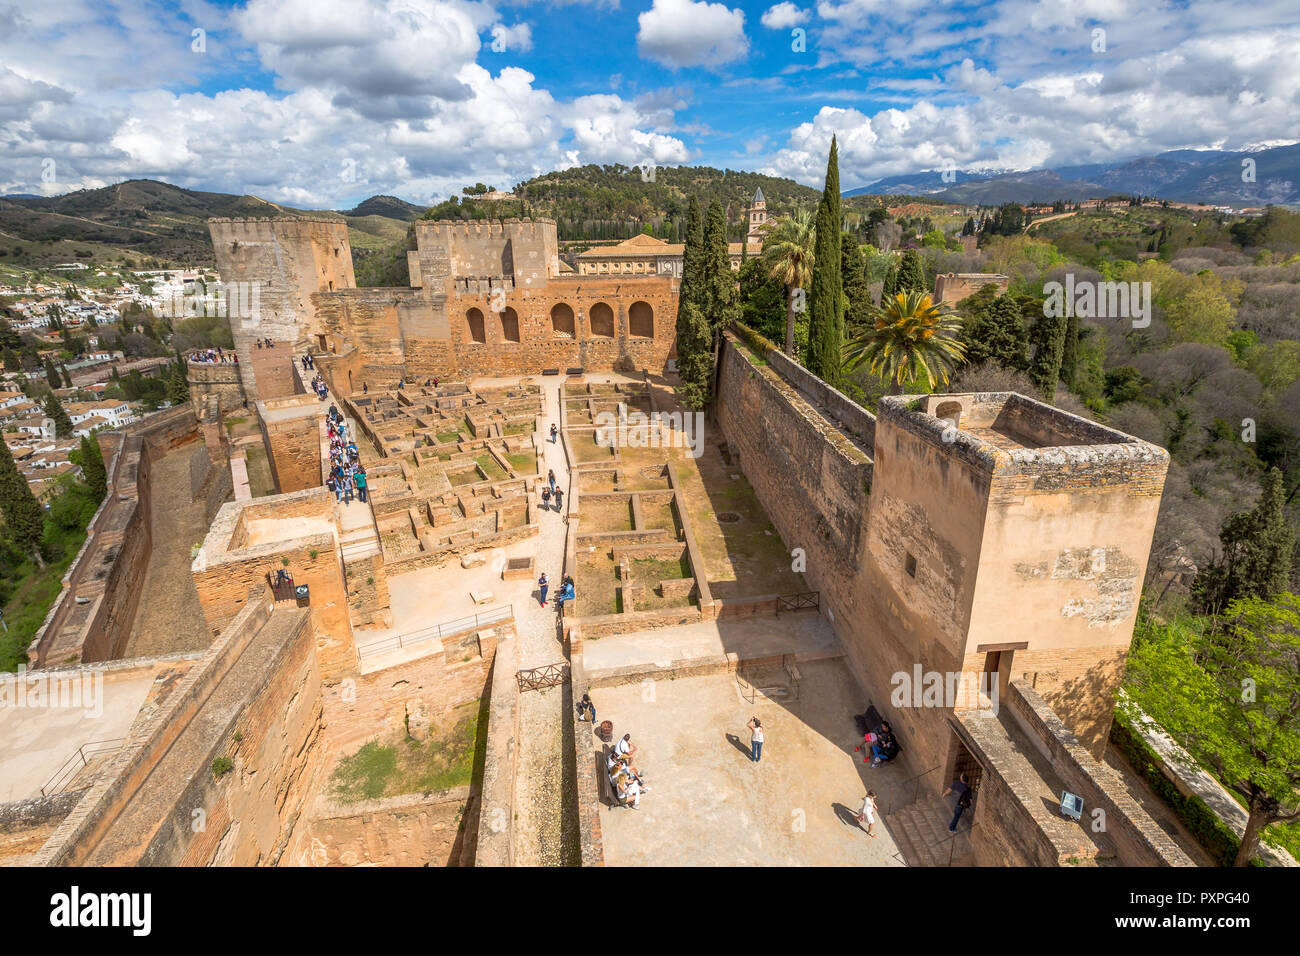 Granada, Spain - April 17, 2016: aerial view of people and tourists visiting the Alcazaba de Granada, the military fortress of Alhambra, one of the most visited attractions of Andalusia. Stock Photo